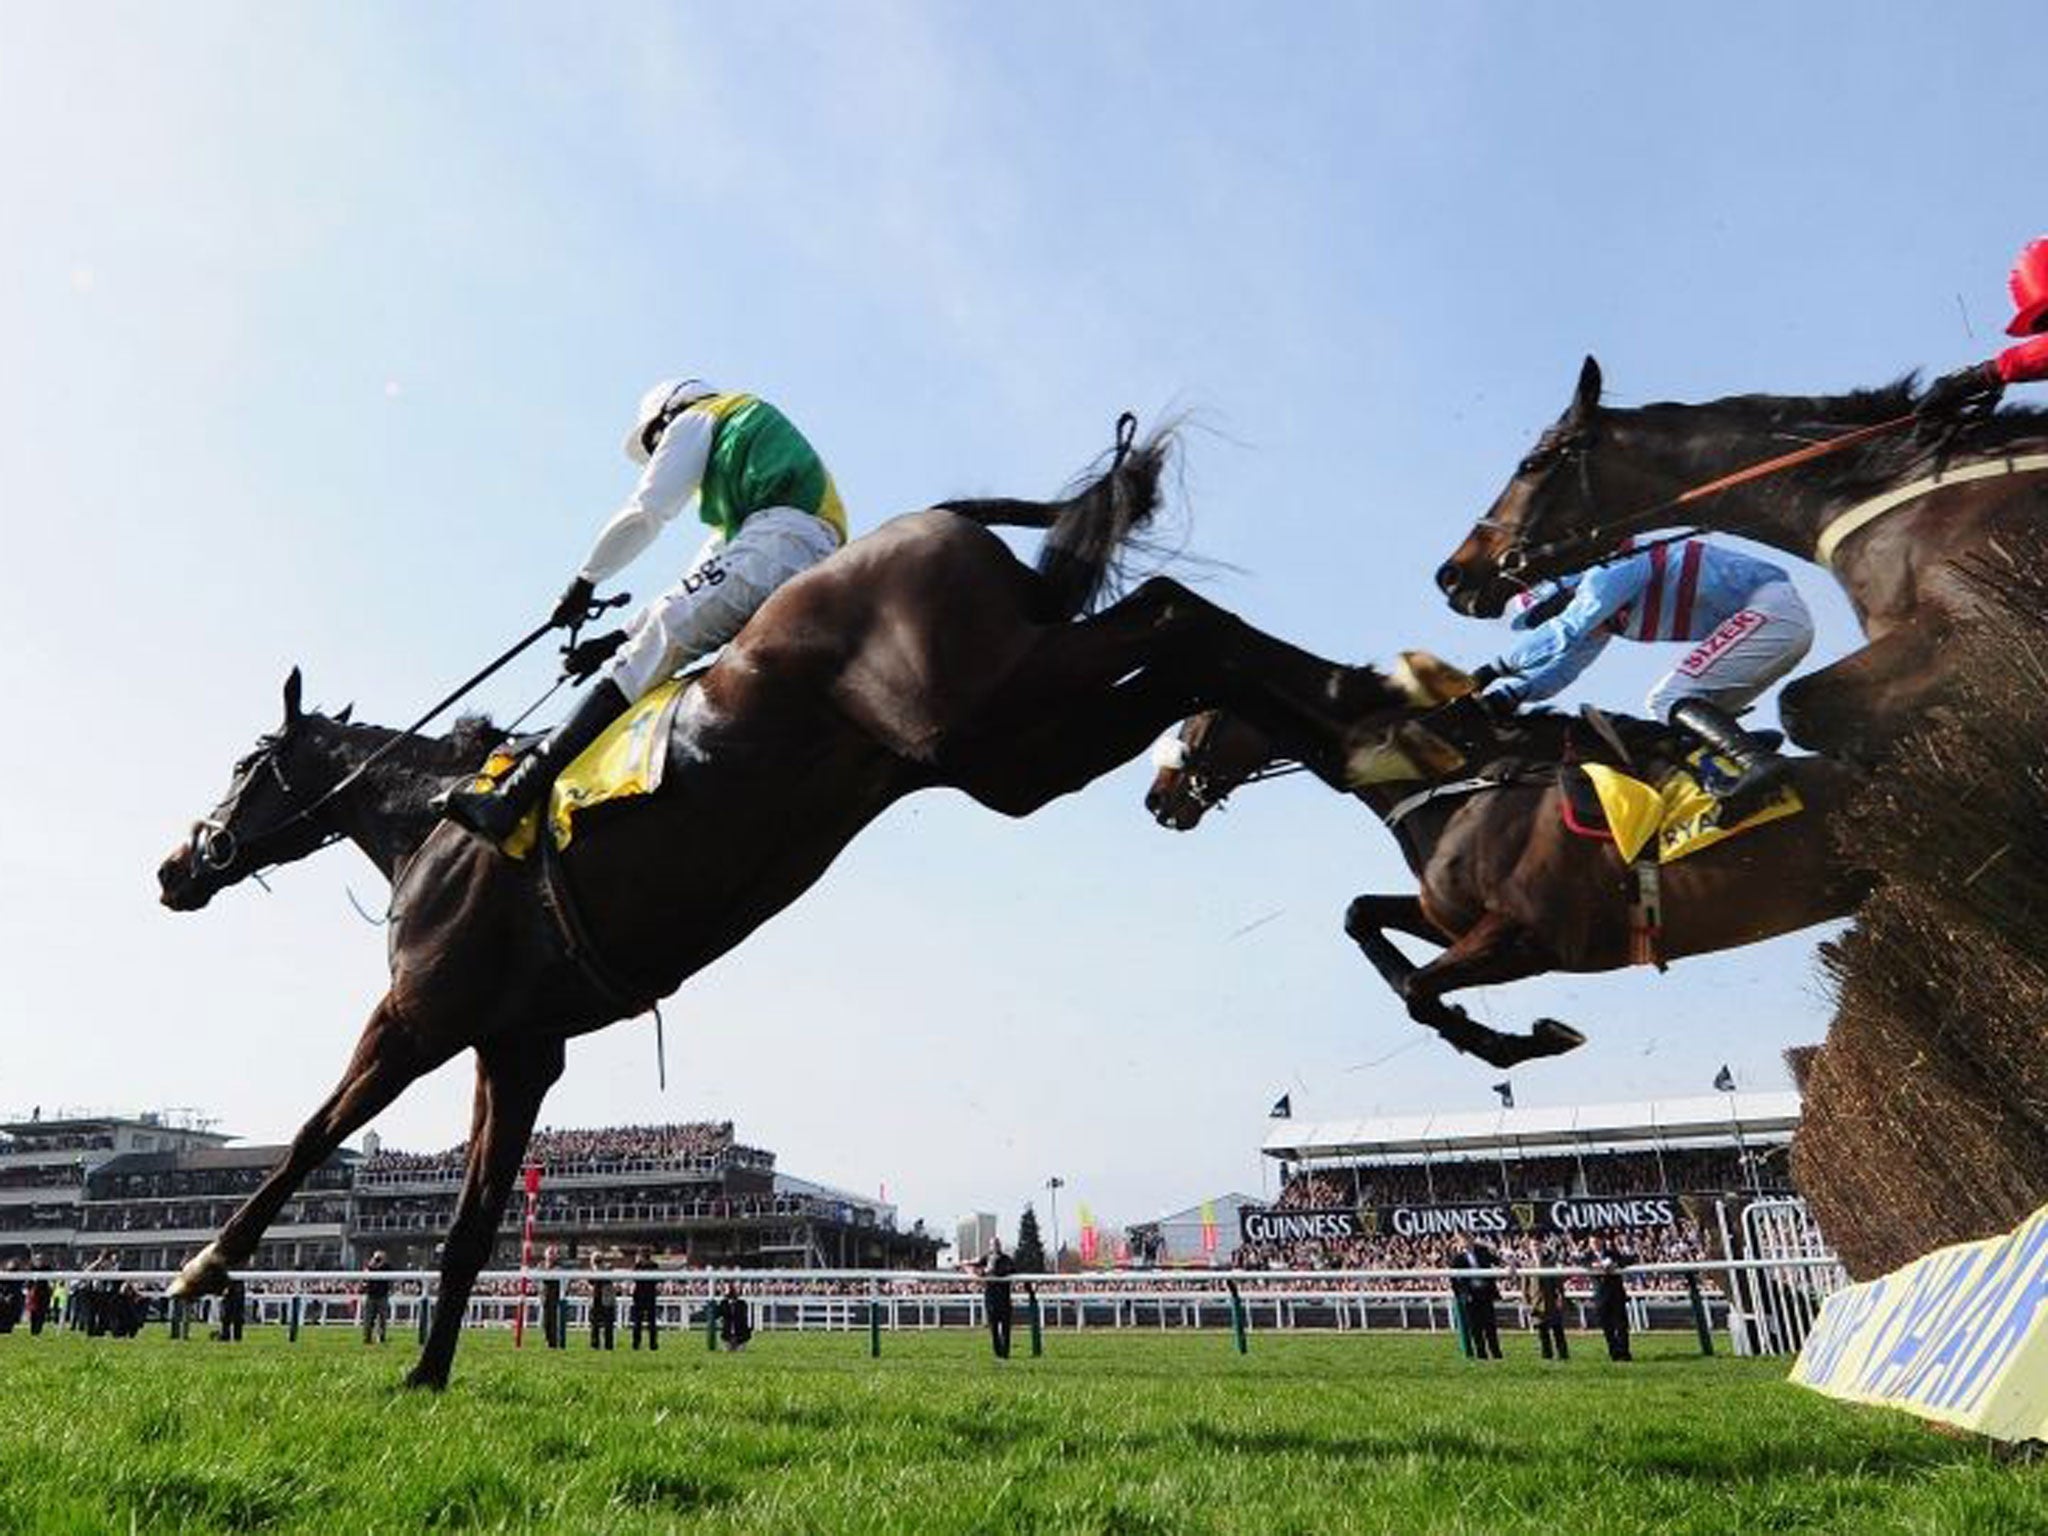 For the high jump?: Sponsors are beginning to wonder about the toxicity of the Festival and Grand National